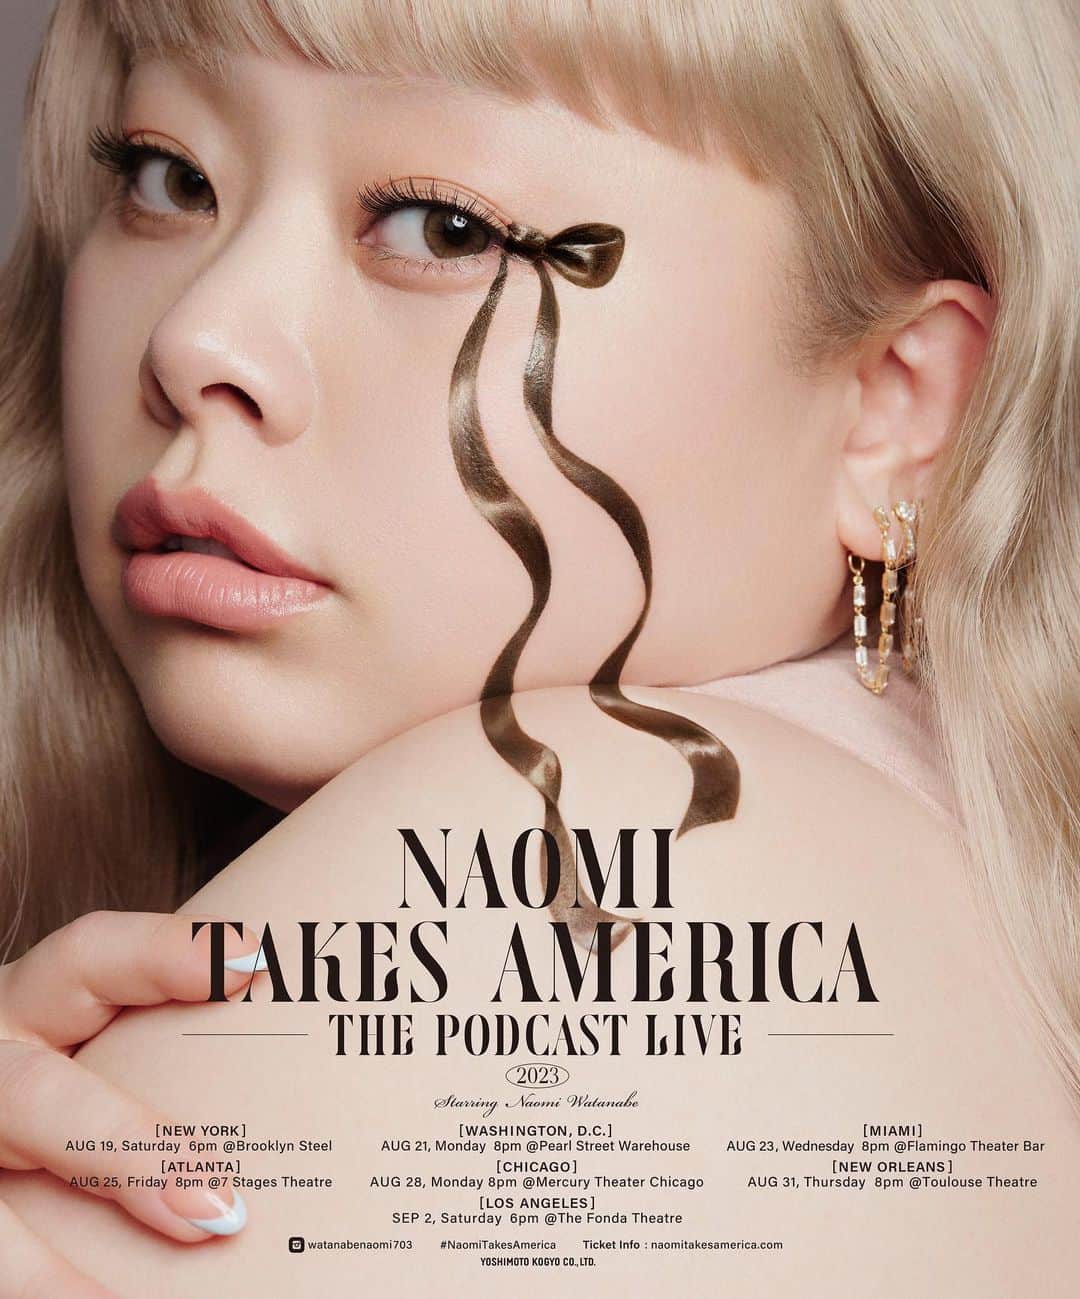 渡辺直美のインスタグラム：「Thank you always for listening to the Naomi Takes America podcast!!  This summer, we are jumping out of the studio to hop around the U.S. to do live shows!!  I can't wait to meet all my fans in person!!  Just like in the podcast, I hope to talk and have a great time with everyone that comes to the shows.   Tell me all about your city🫶  The shows will all be in English‼︎  Let's see if you guys will be able to understand my English lol Accidents may happen but let's have fun!!😂  Cities here💁‍♀️ (Ticket sale start time in local time)  New York @ Brooklyn Steel Saturday, Aug 19, 6pm (🎫sales start Aug 8, 8pm)  Washington, D.C. ＠Pearl Street Warehouse Monday, Aug 21,  8pm (🎫sales start Aug 8, 8pm)  Miami ＠Flamingo Theater Bar Wednesday, Aug 23,  8pm (🎫sales start Aug 8, 8pm)  Atlanta ＠7 Stages Theatre  Friday, Aug 25, 8pm (🎫sales start Aug 14 , 8pm)  Chicago ＠Mercury Theater  Monday, Aug 28, 8pm (🎫sales start Aug 10, 7pm)  New Orleans ＠Toulouse Theatre Thursday, Aug 31, 8pm (🎫sales start Aug 8, 7pm)  Los Angeles ＠The Fonda Theatre Saturday, Sep 2,  6pm (🎫sales start Aug 14 , 5pm)  Tickets can be purchased from link in profile🔗  Also, season 3 of the podcast will be starting this Thursday🎀 Please check it out!   Poster was designed by @yuni_yoshida  It's so cute🫶  ポッドキャストNaomi Takes Americaを聴いてくれてる皆様いつもありがとうございます！！  この夏、スタジオから飛び出して 全米各地でライブすることになりました！！！ ライブツアー！！！！！ わーい！ドキドキ！！  ポッドキャスト同様みんなとお話ししながらトークしていくライブだよ！！  ぐにょぐにょ英語で頑張ります！笑 ぜひあなたの街について教えて下さい！  公演情報とチケット発売日は現地時間で上記に記載しています！！  詳細はプロフィールにあるリンクから🔗  あとシーズン3も今週からスタート🎀 お楽しみにー！  ポスターは @yuni_yoshida さんデザインです！ 目がリボンの片方になってるにょ！ 全部手書き！！うにょ！  #naomitakesamerica」